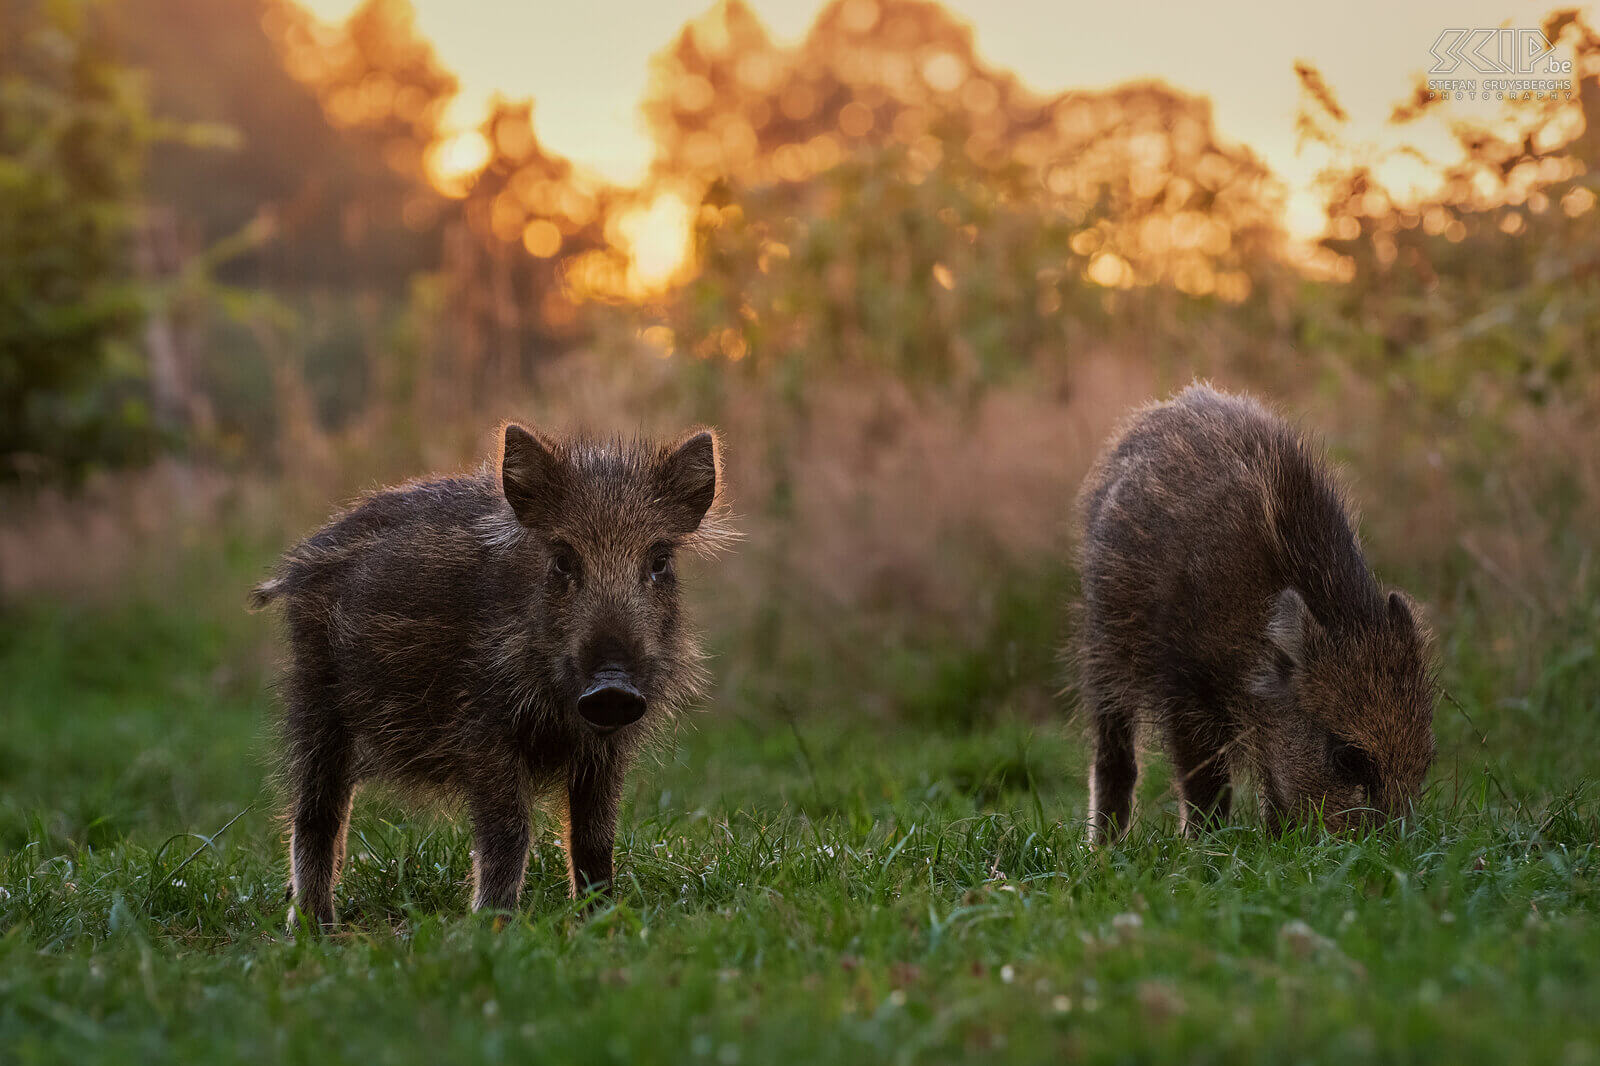 Wild boars at sunset This summer I went three times to the Belgian Ardennes an observation hut on the Plateau des Tailles near Baraque de Fraiture to photograph wild animals. Armed with my camera and short telephoto lens and a wide-angle camera that I could remotely control, I was able to take a varied series of images of the wild boars. A small group of young pigs often showed up before sunset. The big family with heavy boars and sows and also young squeakers usually only came at dusk or when it was already dark. Stefan Cruysberghs